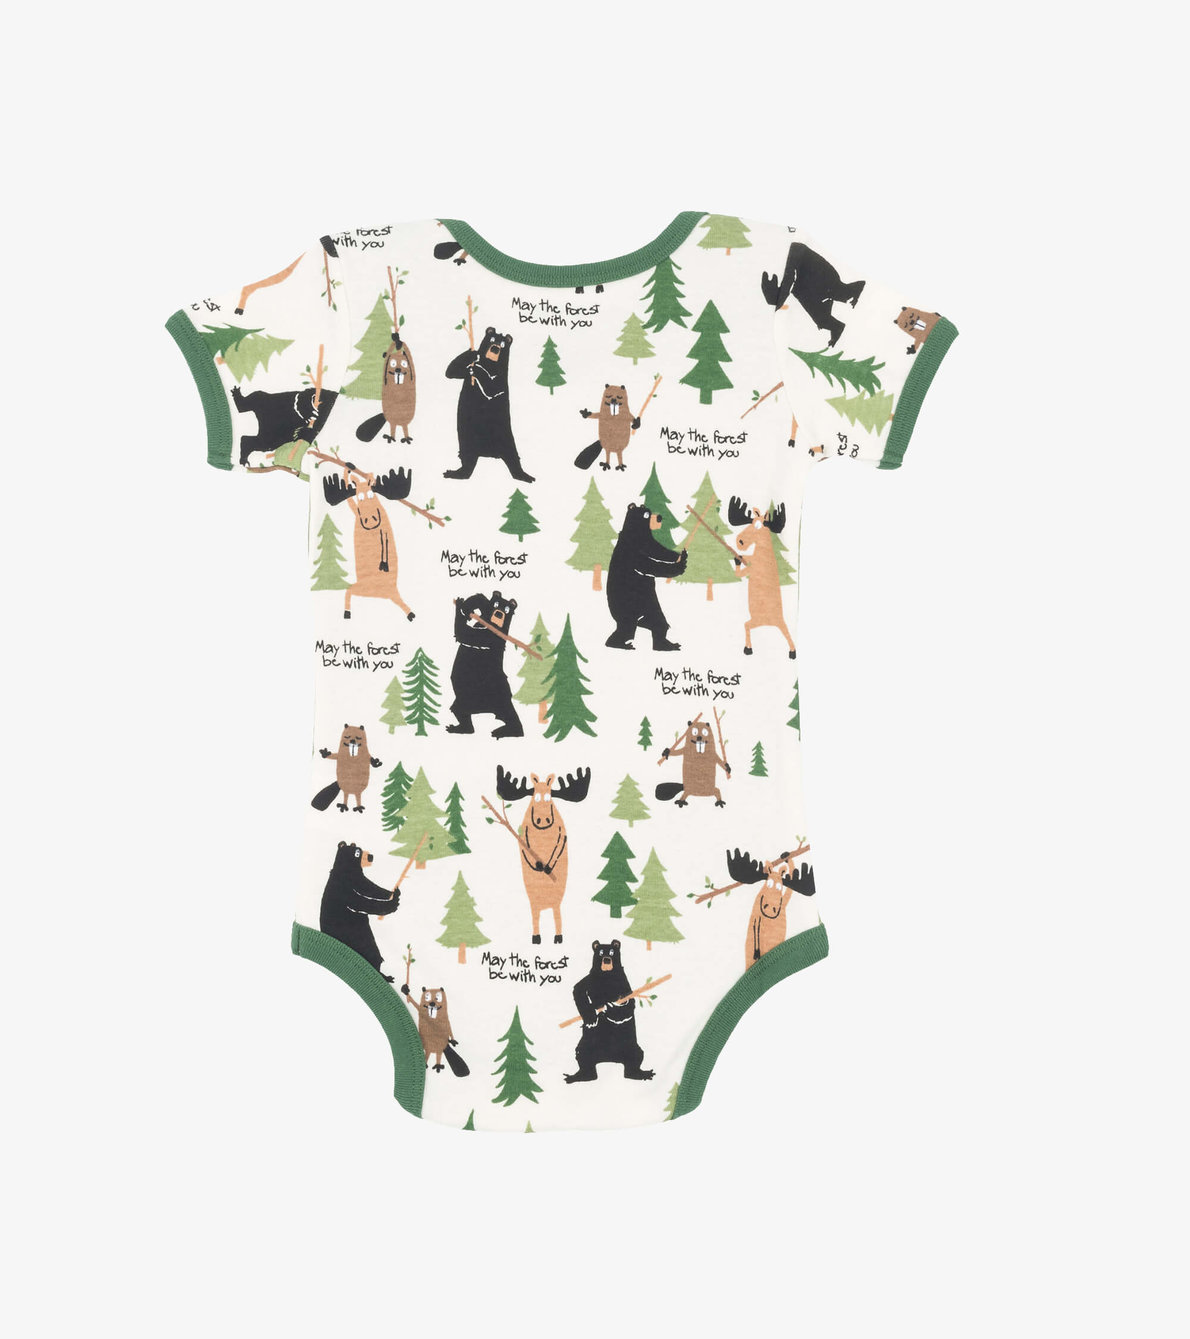 View larger image of May the Forest Be with You Baby Bodysuit with Hat